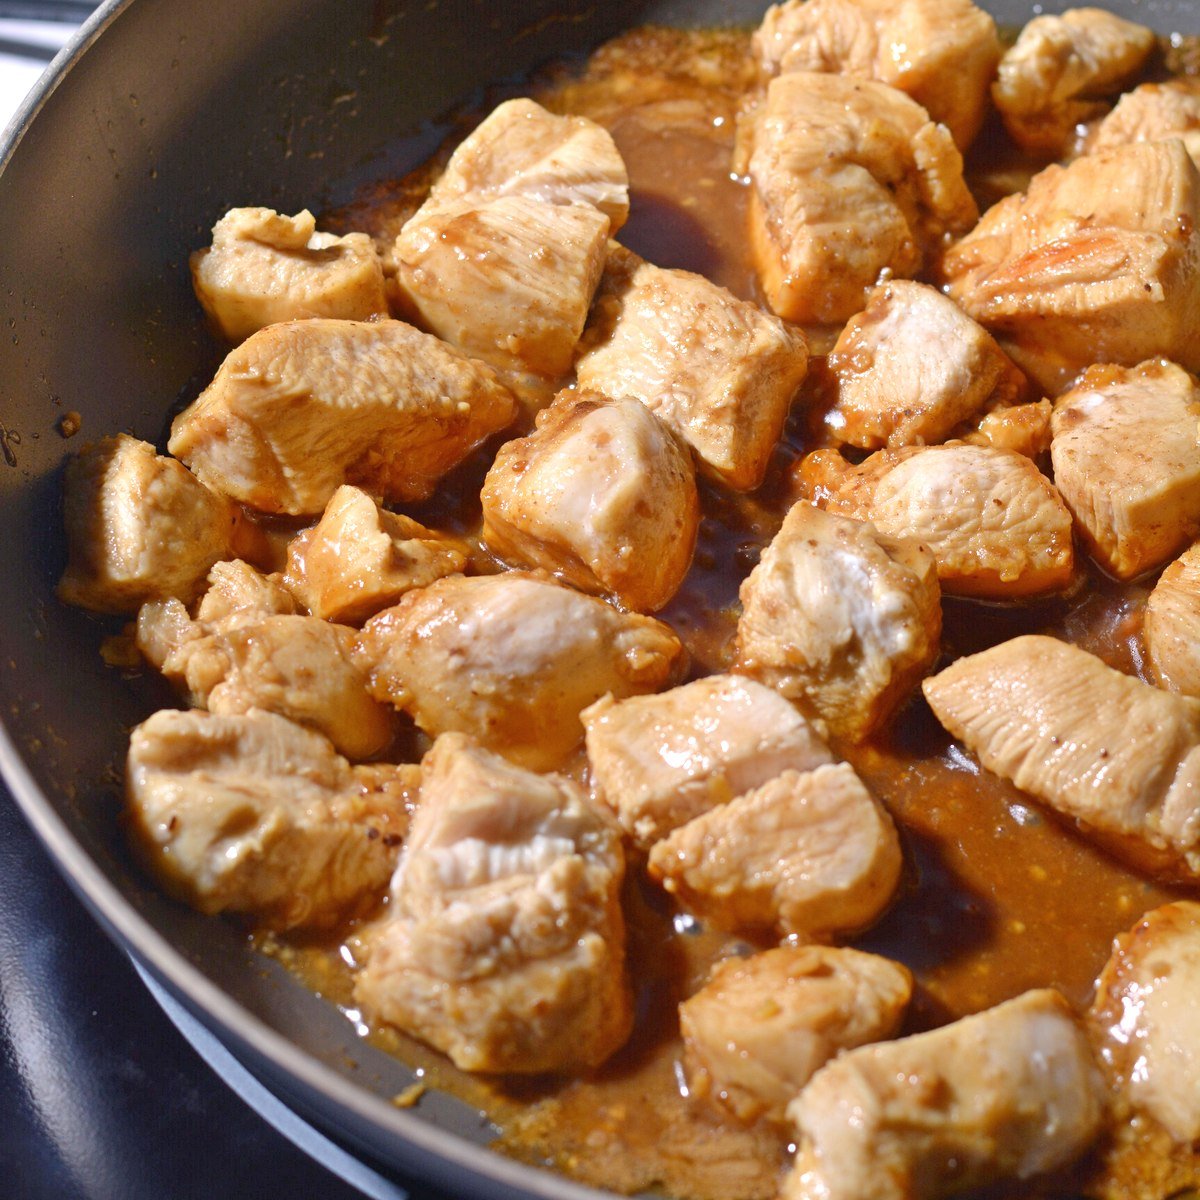 Chicken and teriyaki sauce cooking in a pan after being flipped.